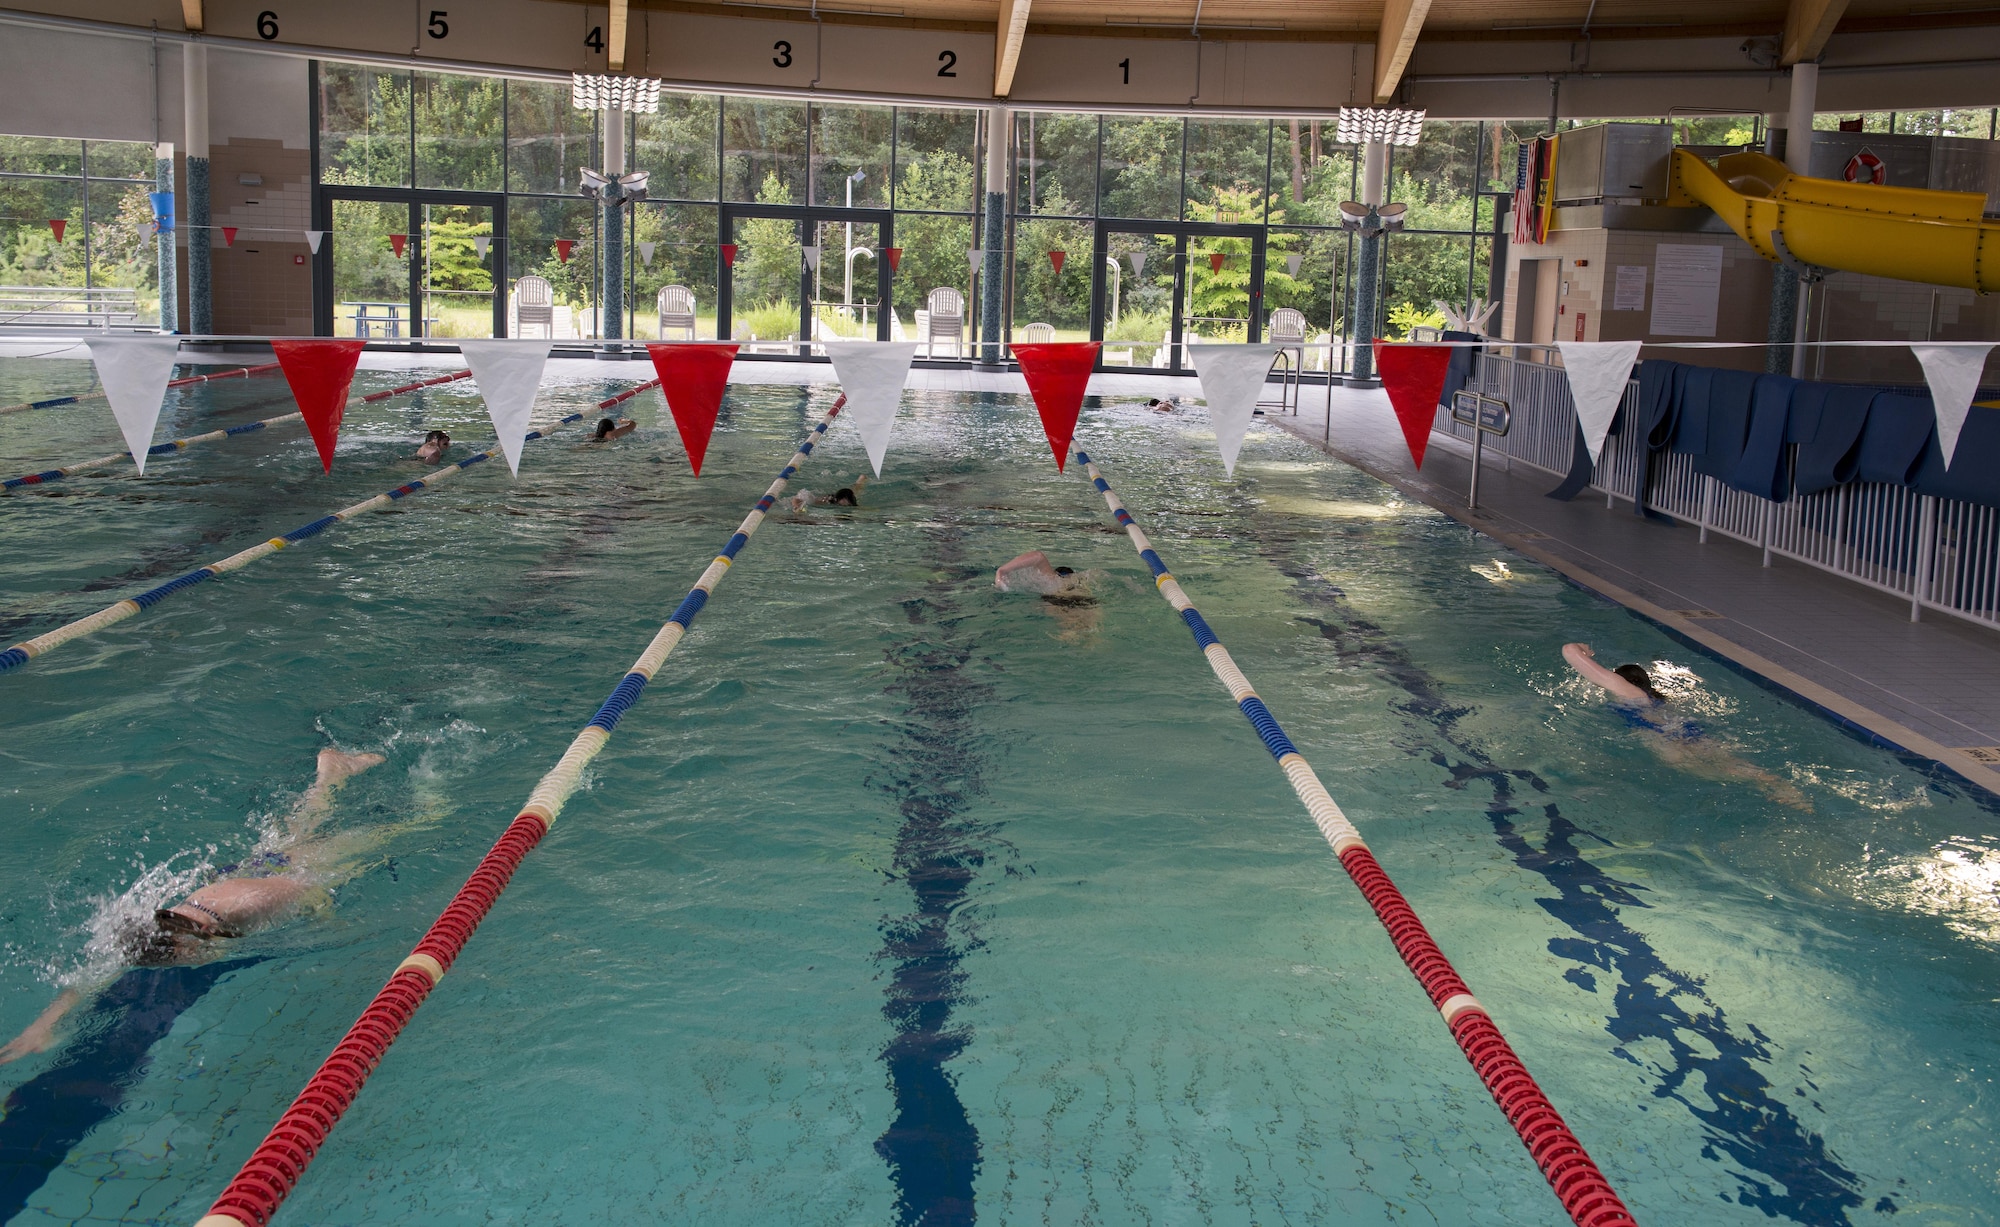 Students of the Ramstein Aquatic Center Lifeguard Course swim as a prerequisite to the course July 11, 2016, at Ramstein Air Base, Germany. The students had to be able to swim 300 meters, tread water without using their arms for two minutes and retrieve a 10-pound brick from the bottom of the pool in order to move on in the lifeguard course. (U.S. Air Force photo/Airman 1st Class Tryphena Mayhugh)